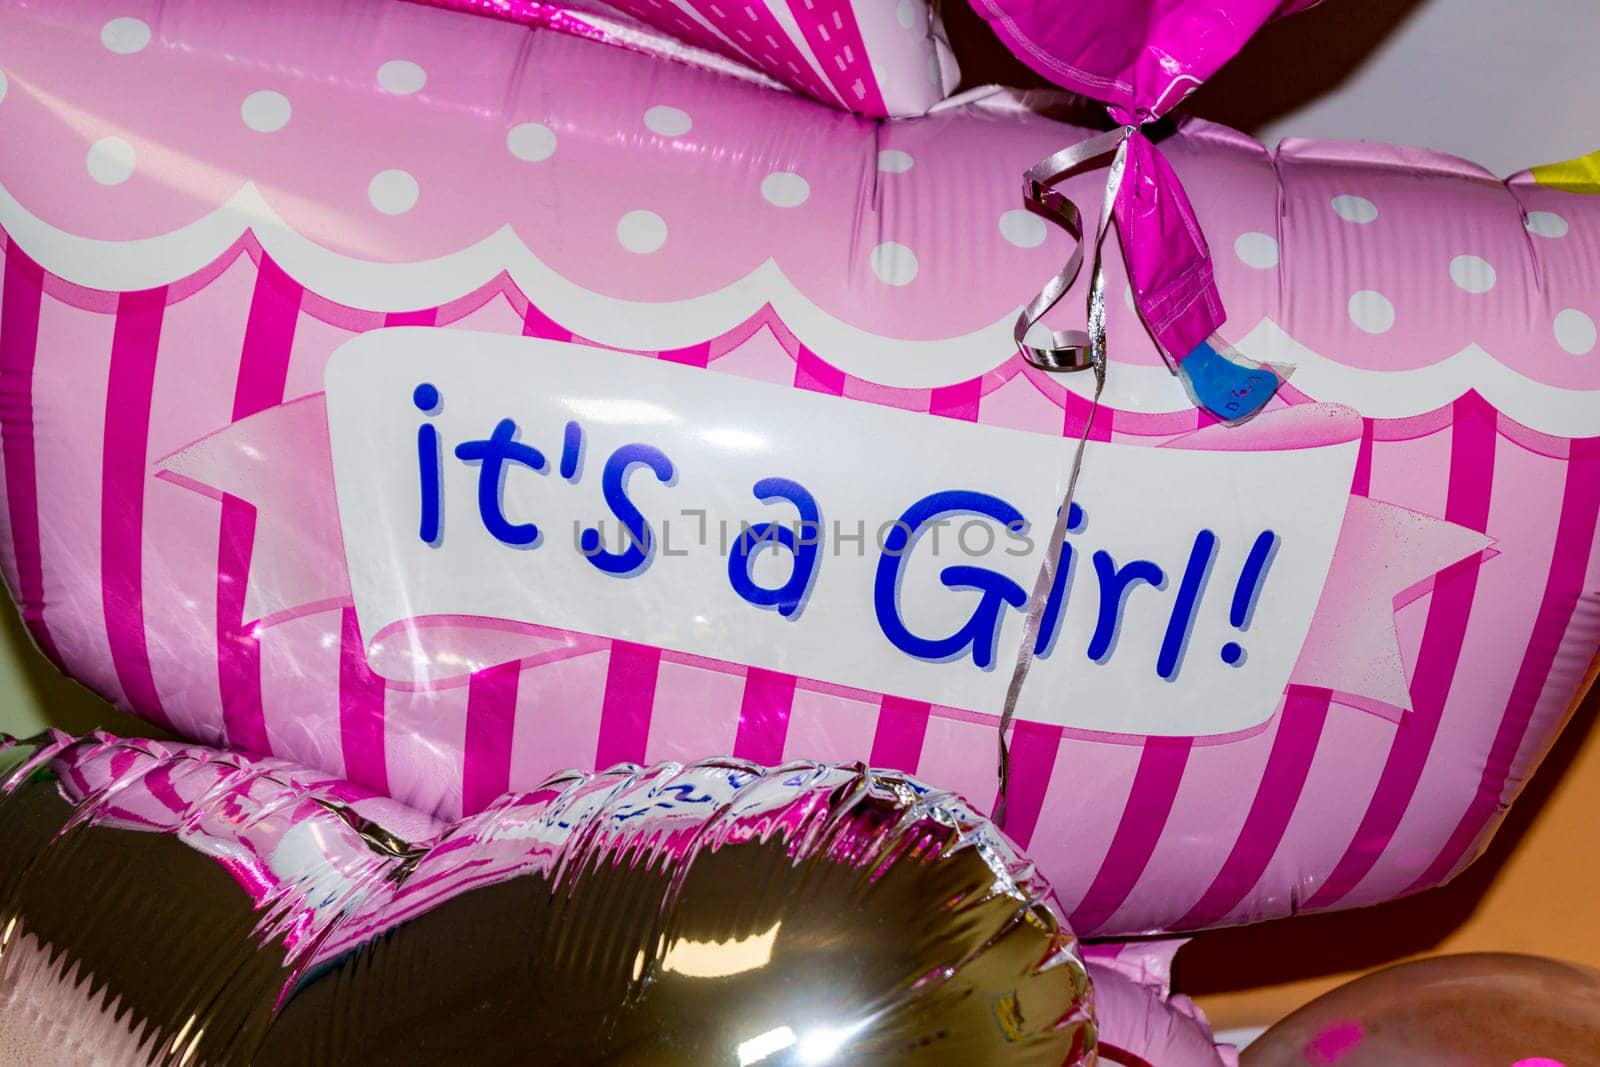 It's a girl. Bright pink balloon close-up.